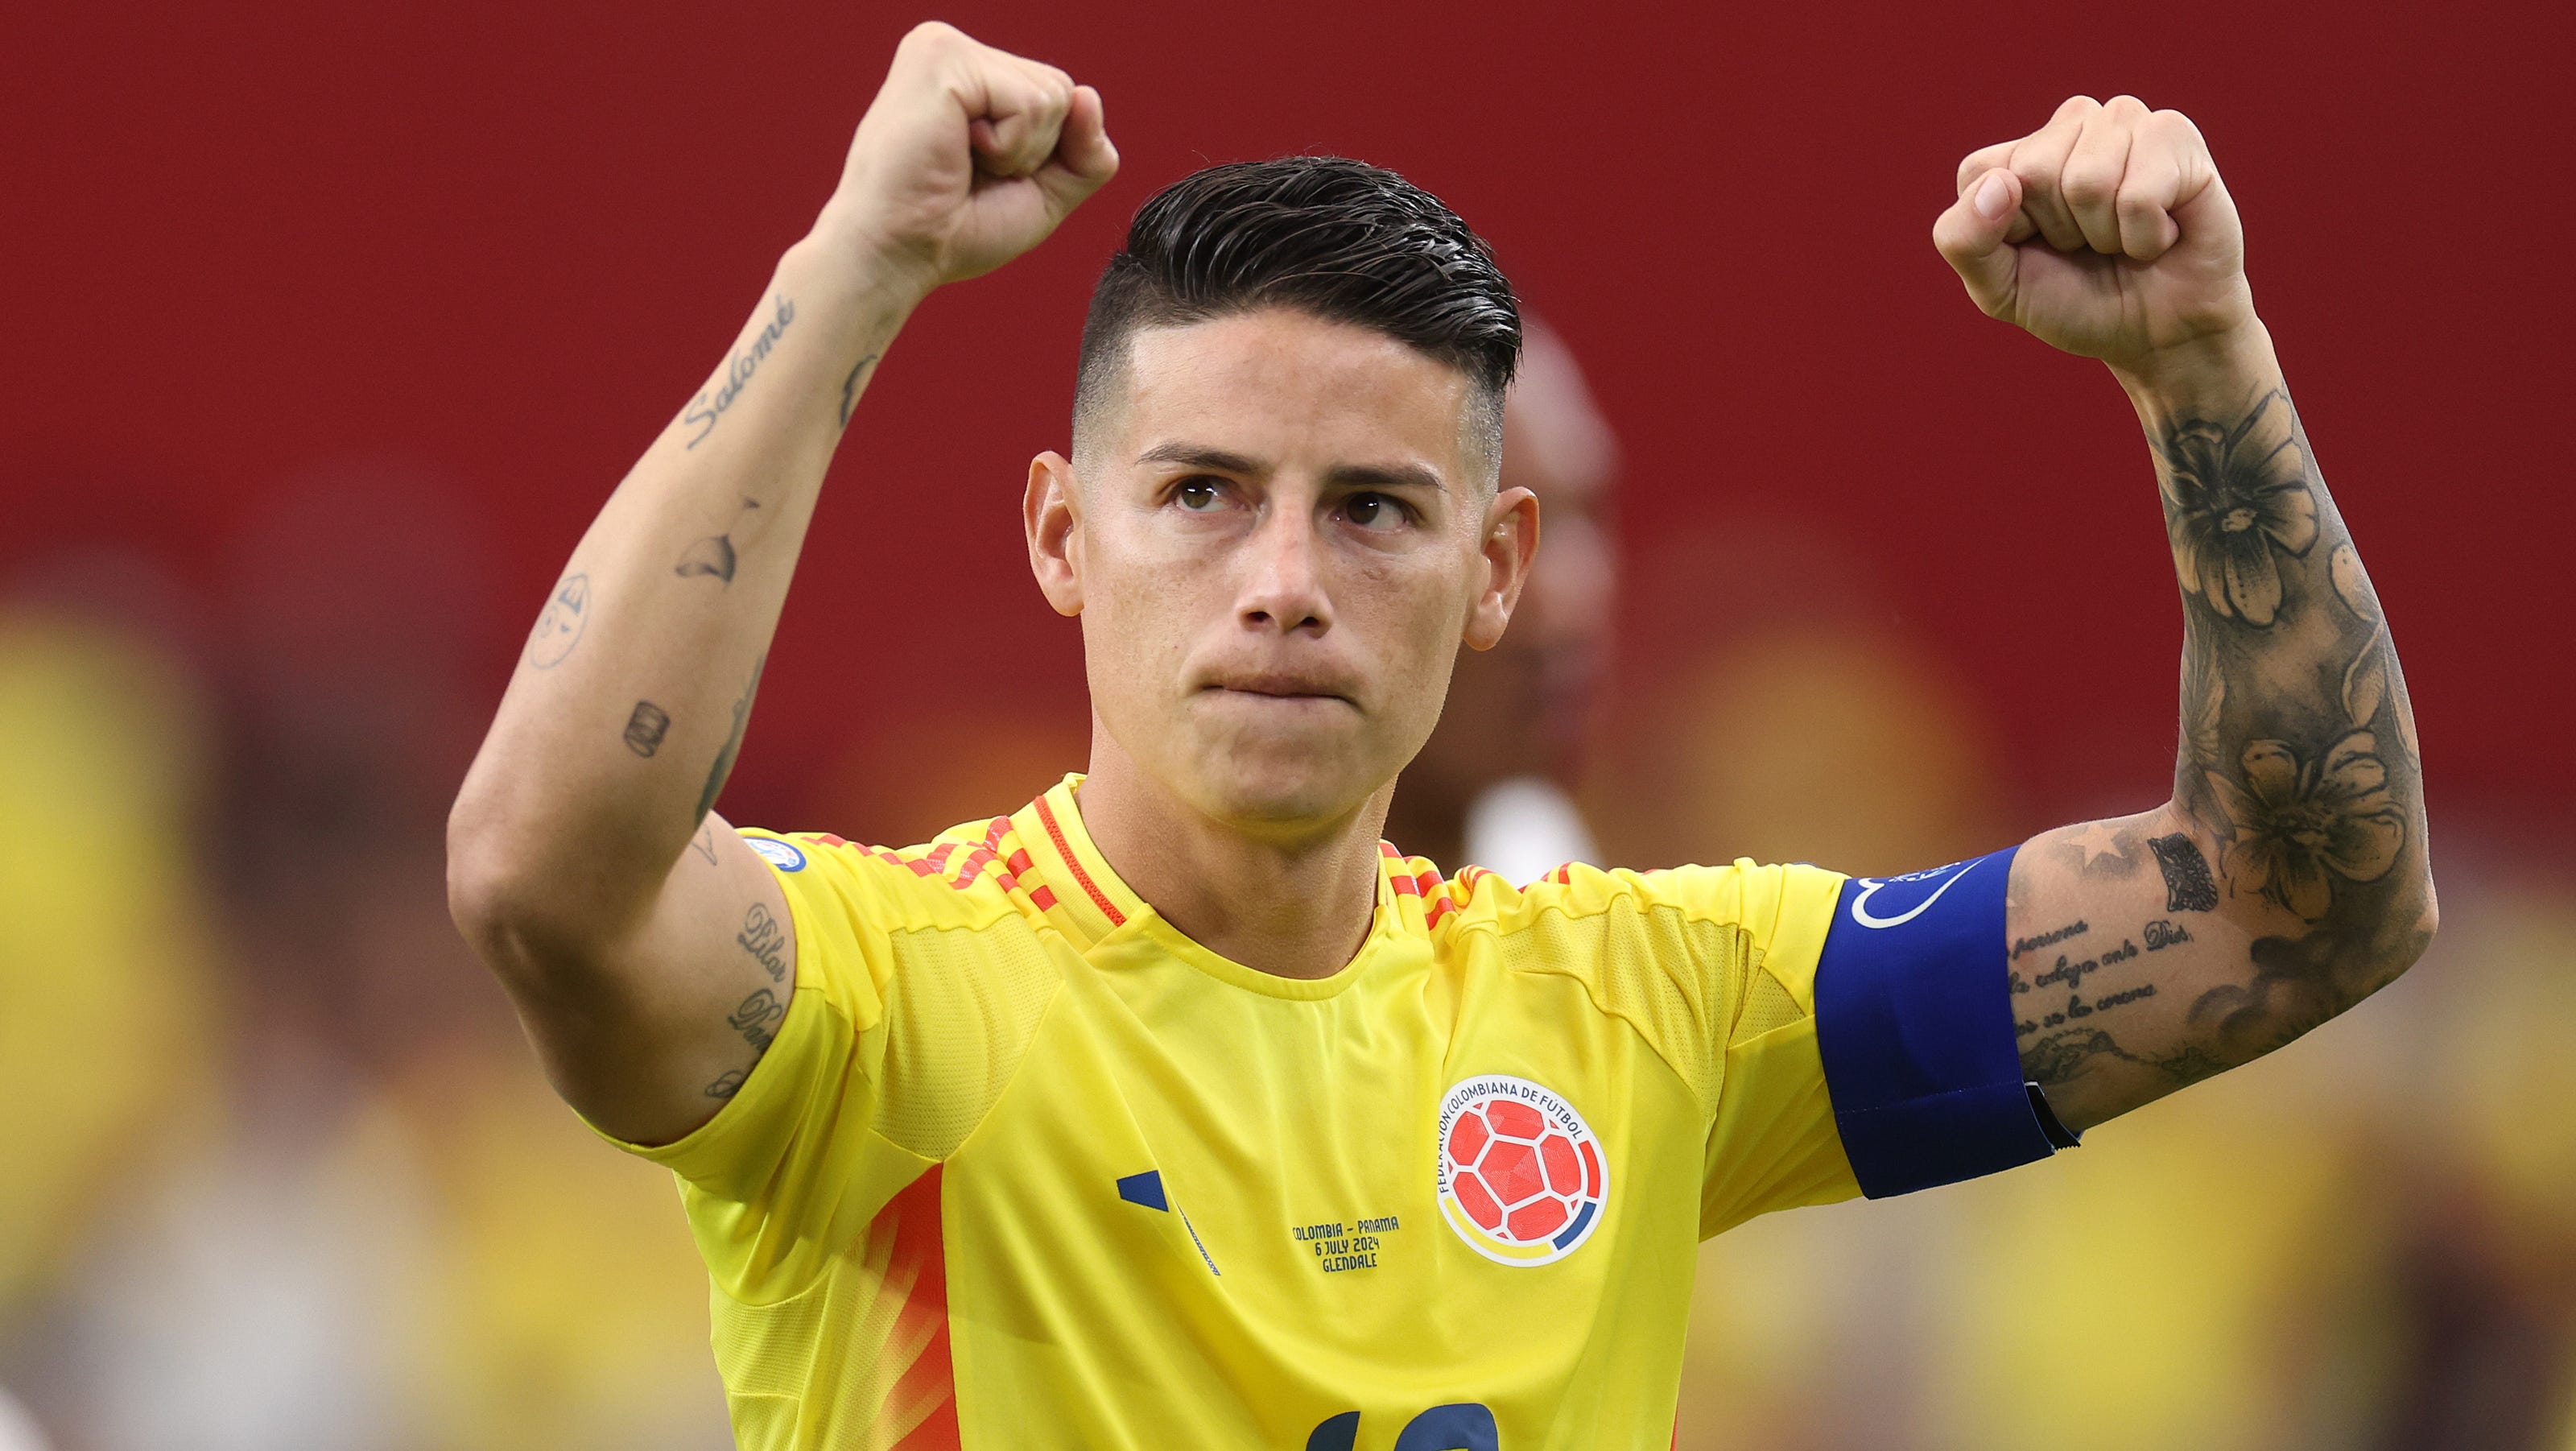 Colombia fans take over State Farm Stadium for Copa America quarterfinal win over Panama